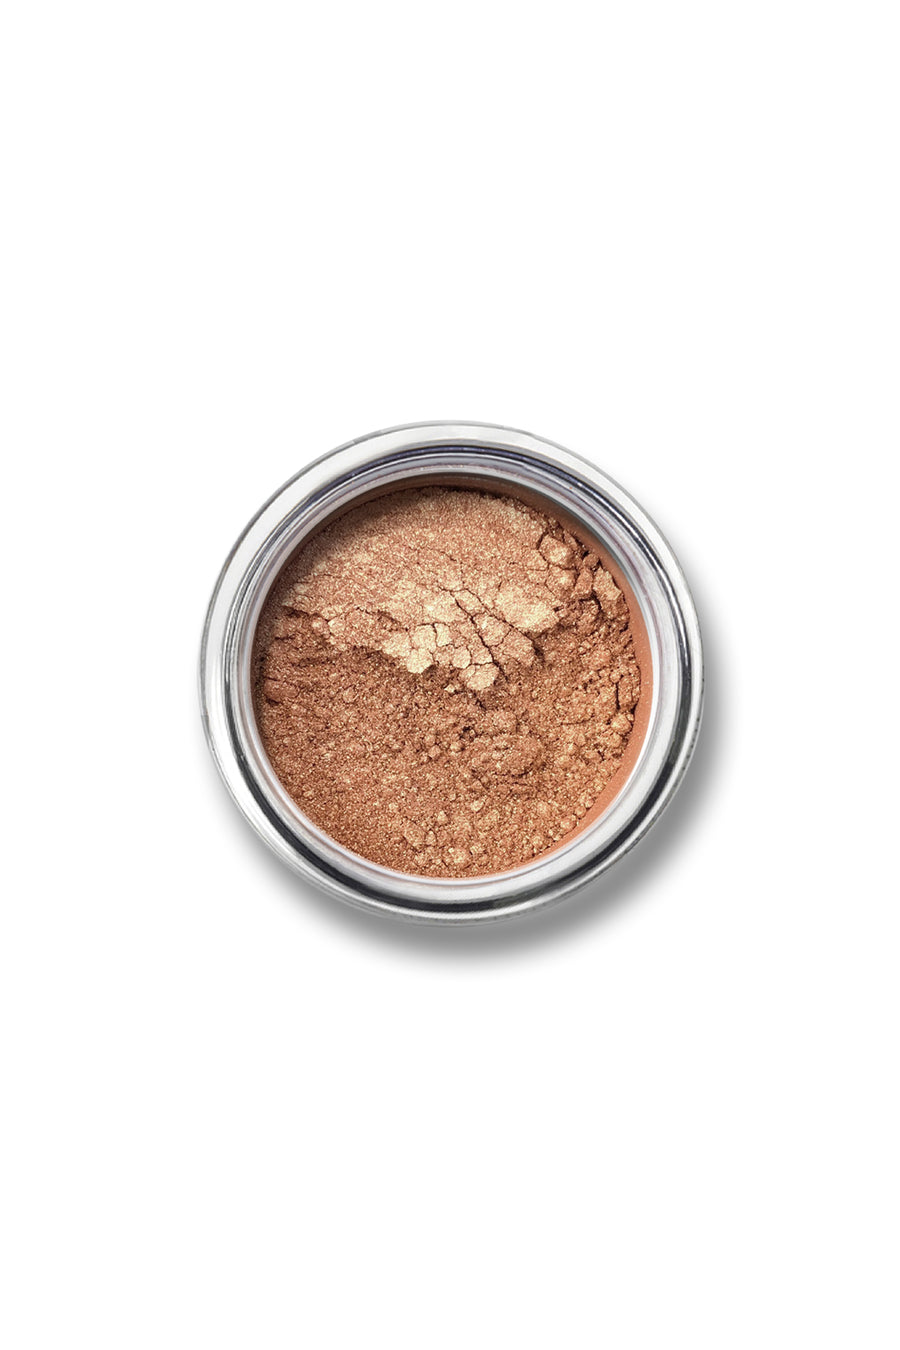 Shimmer Eyeshadow #8 - Lovely Peach - Blend Mineral Cosmetics